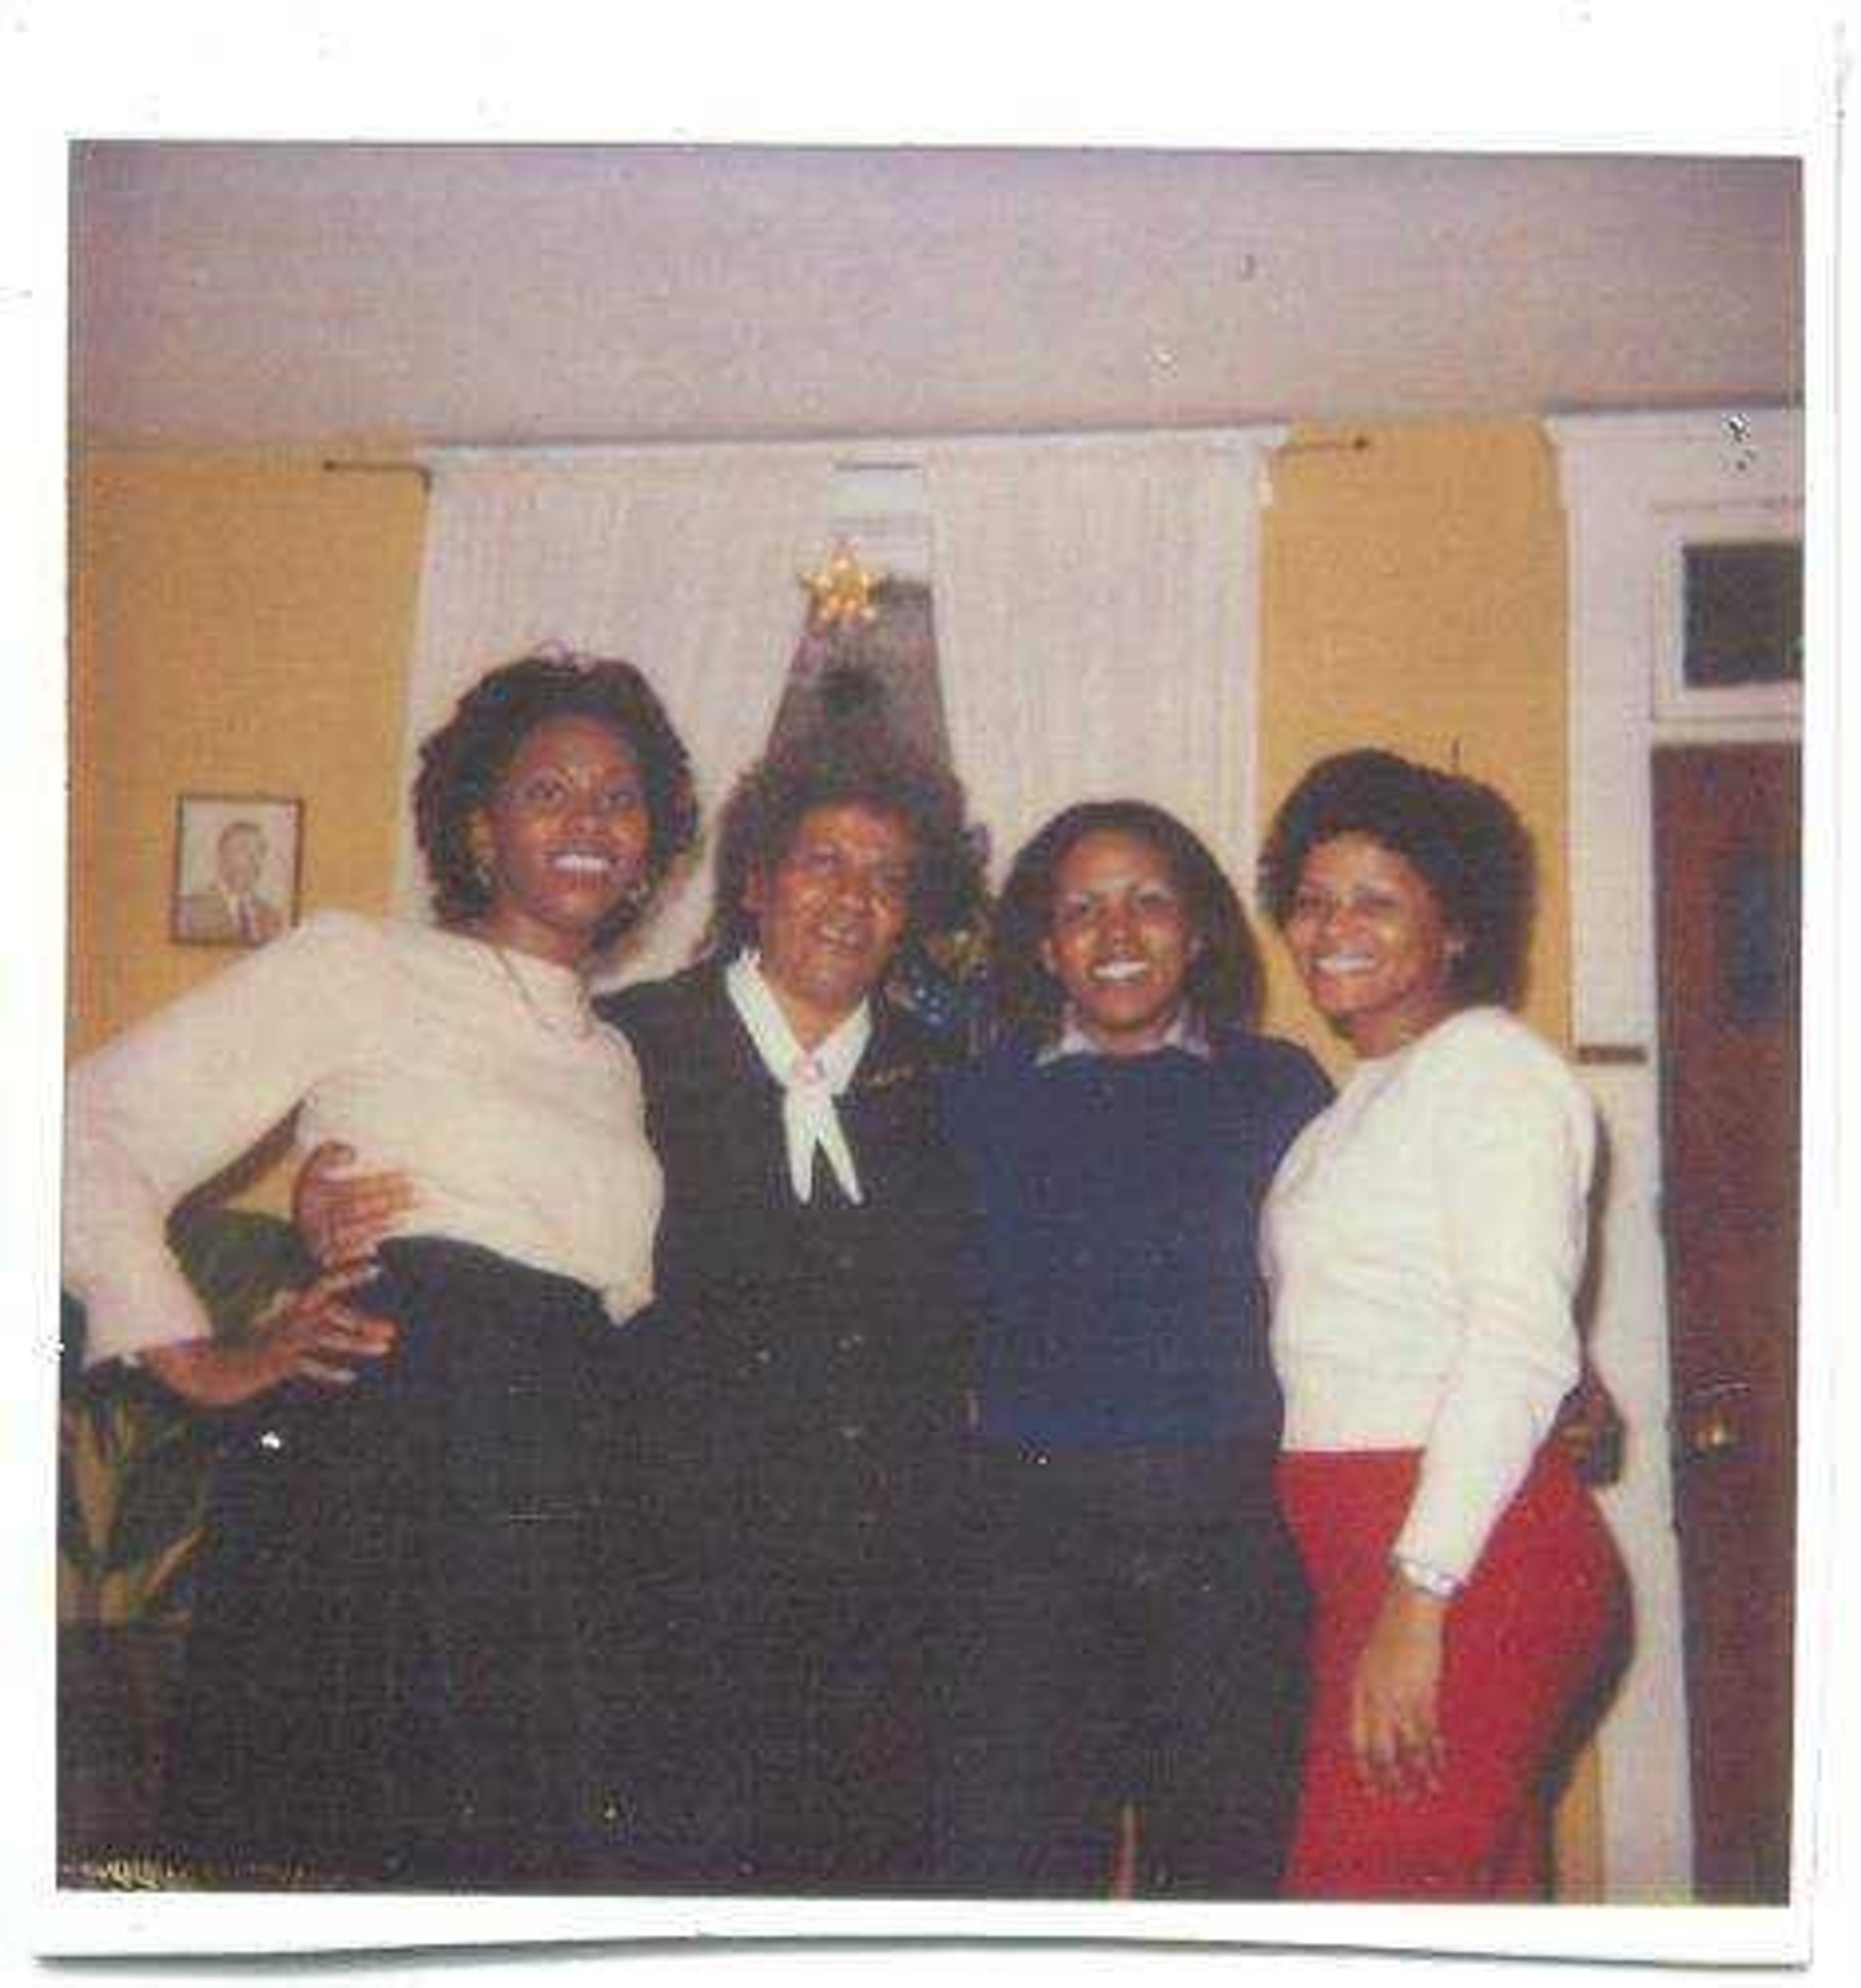 Dean (pictured wearing blue) poses with her mother and two sisters in 1977.